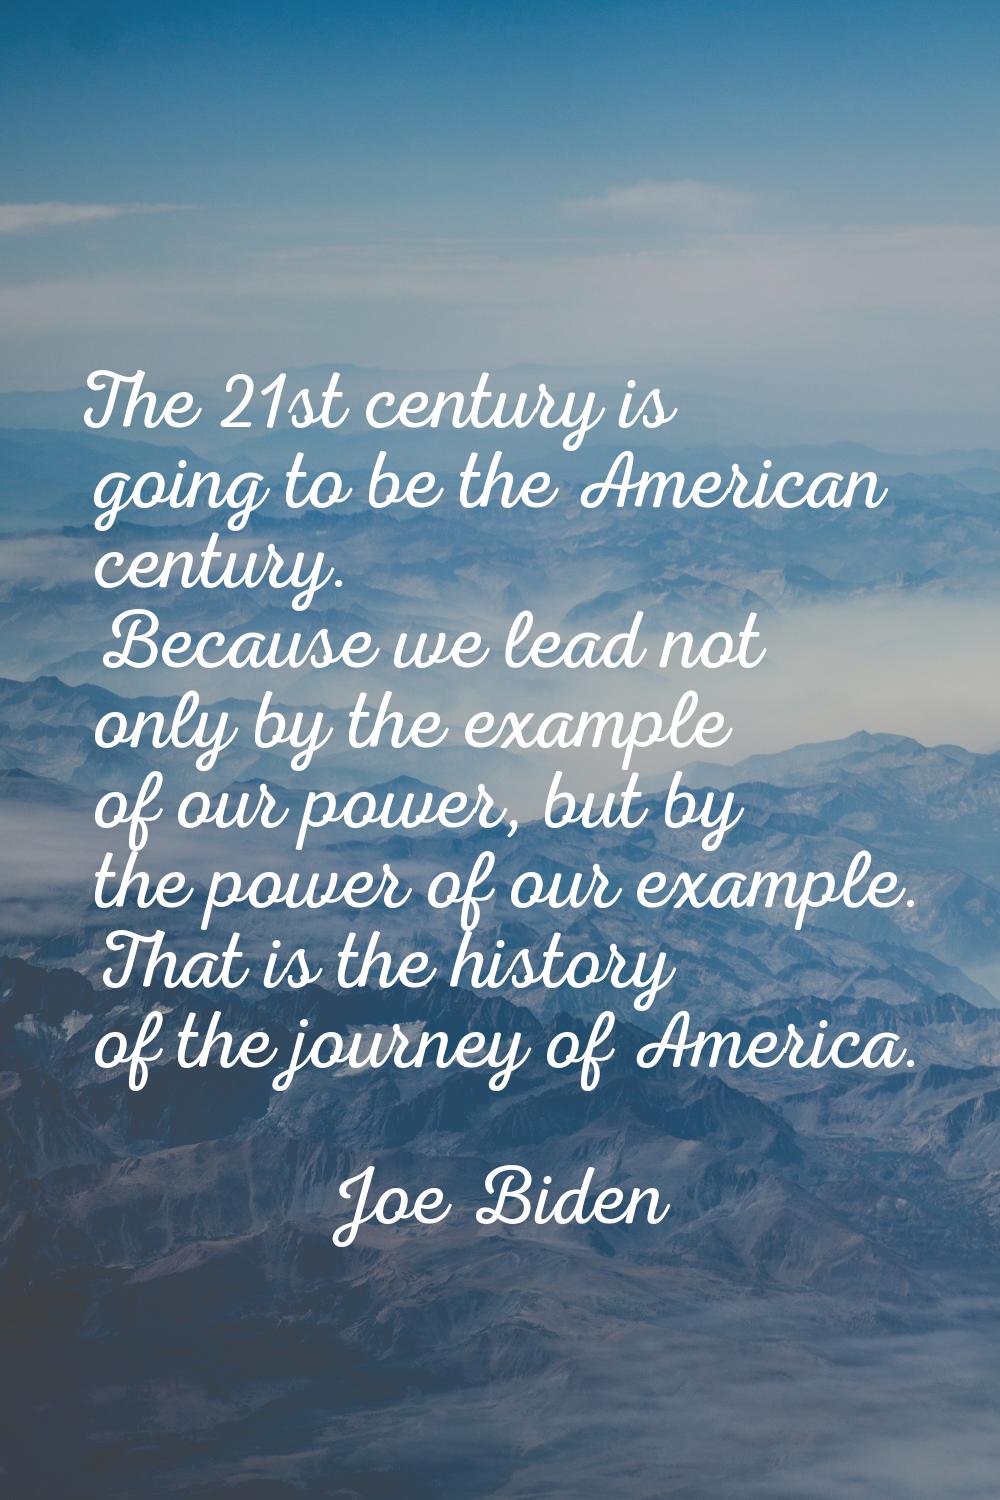 The 21st century is going to be the American century. Because we lead not only by the example of ou